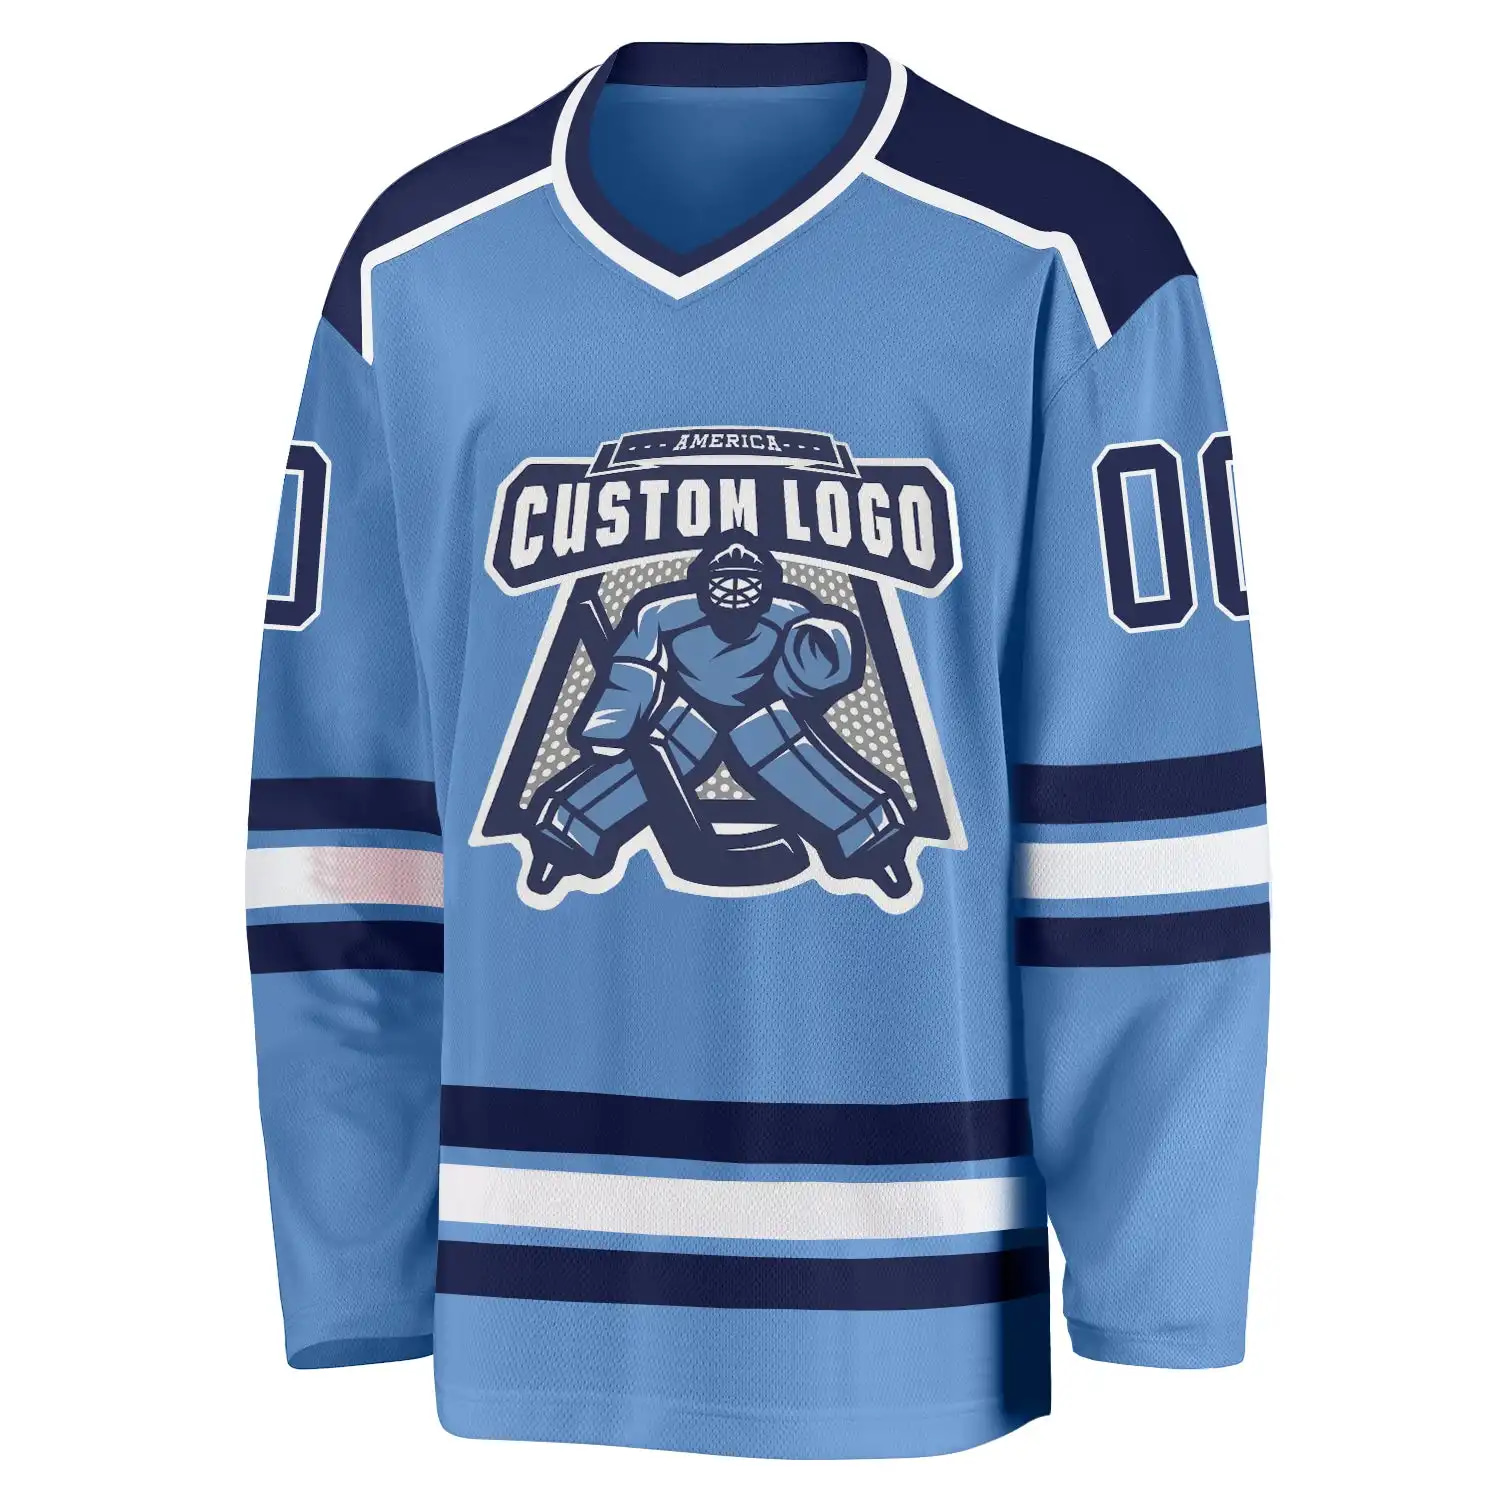 Inktee Store - Stitched And Print Light Blue Navy-White Hockey Jersey Custom Image